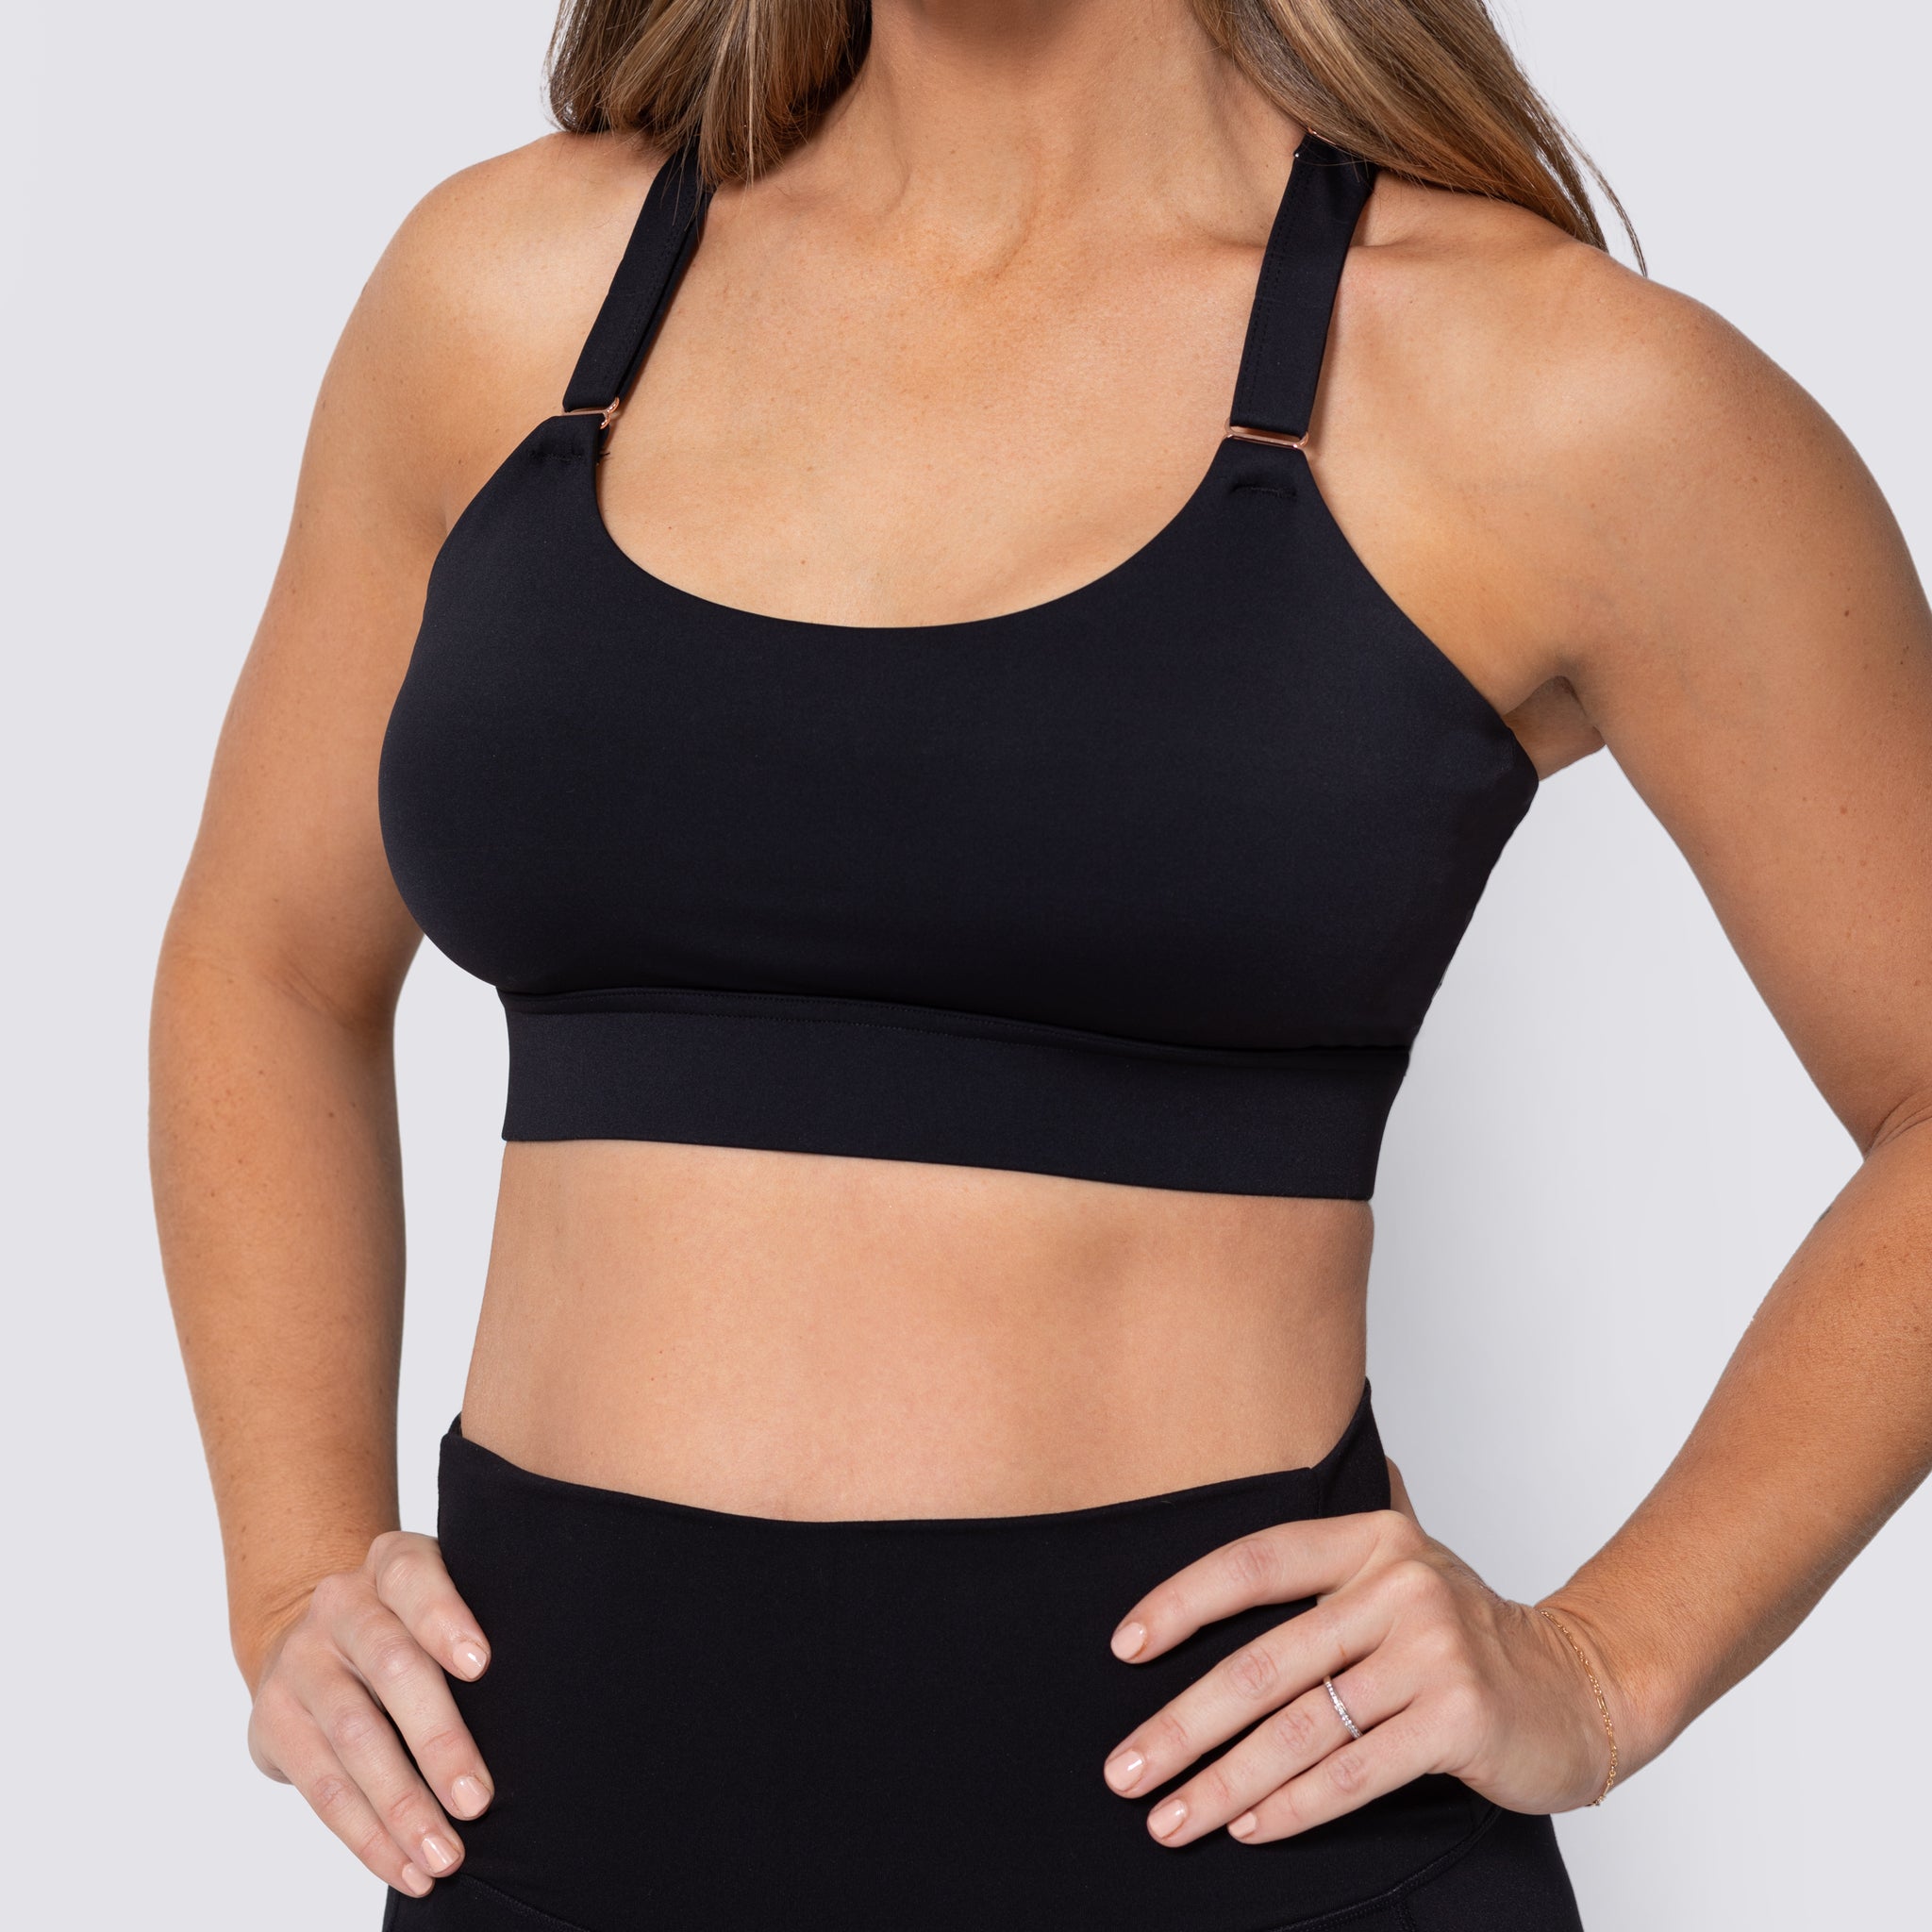 Incline Strappy Sports Bra - Black (Final Sale) – Love and Fit